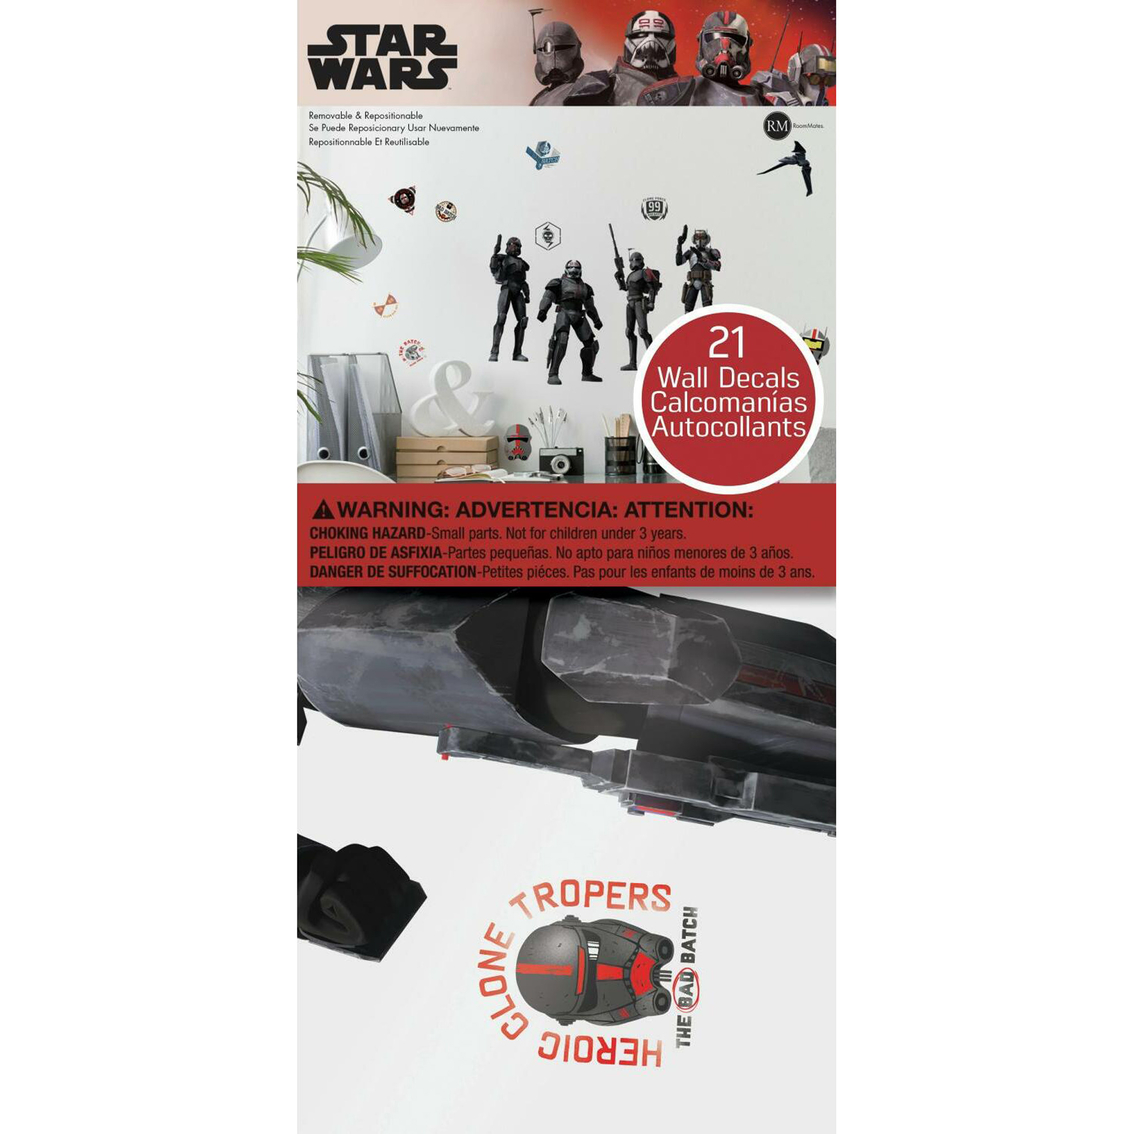 RoomMates Star Wars The Bad Batch Peel and Stick Wall Decals - Image 5 of 5